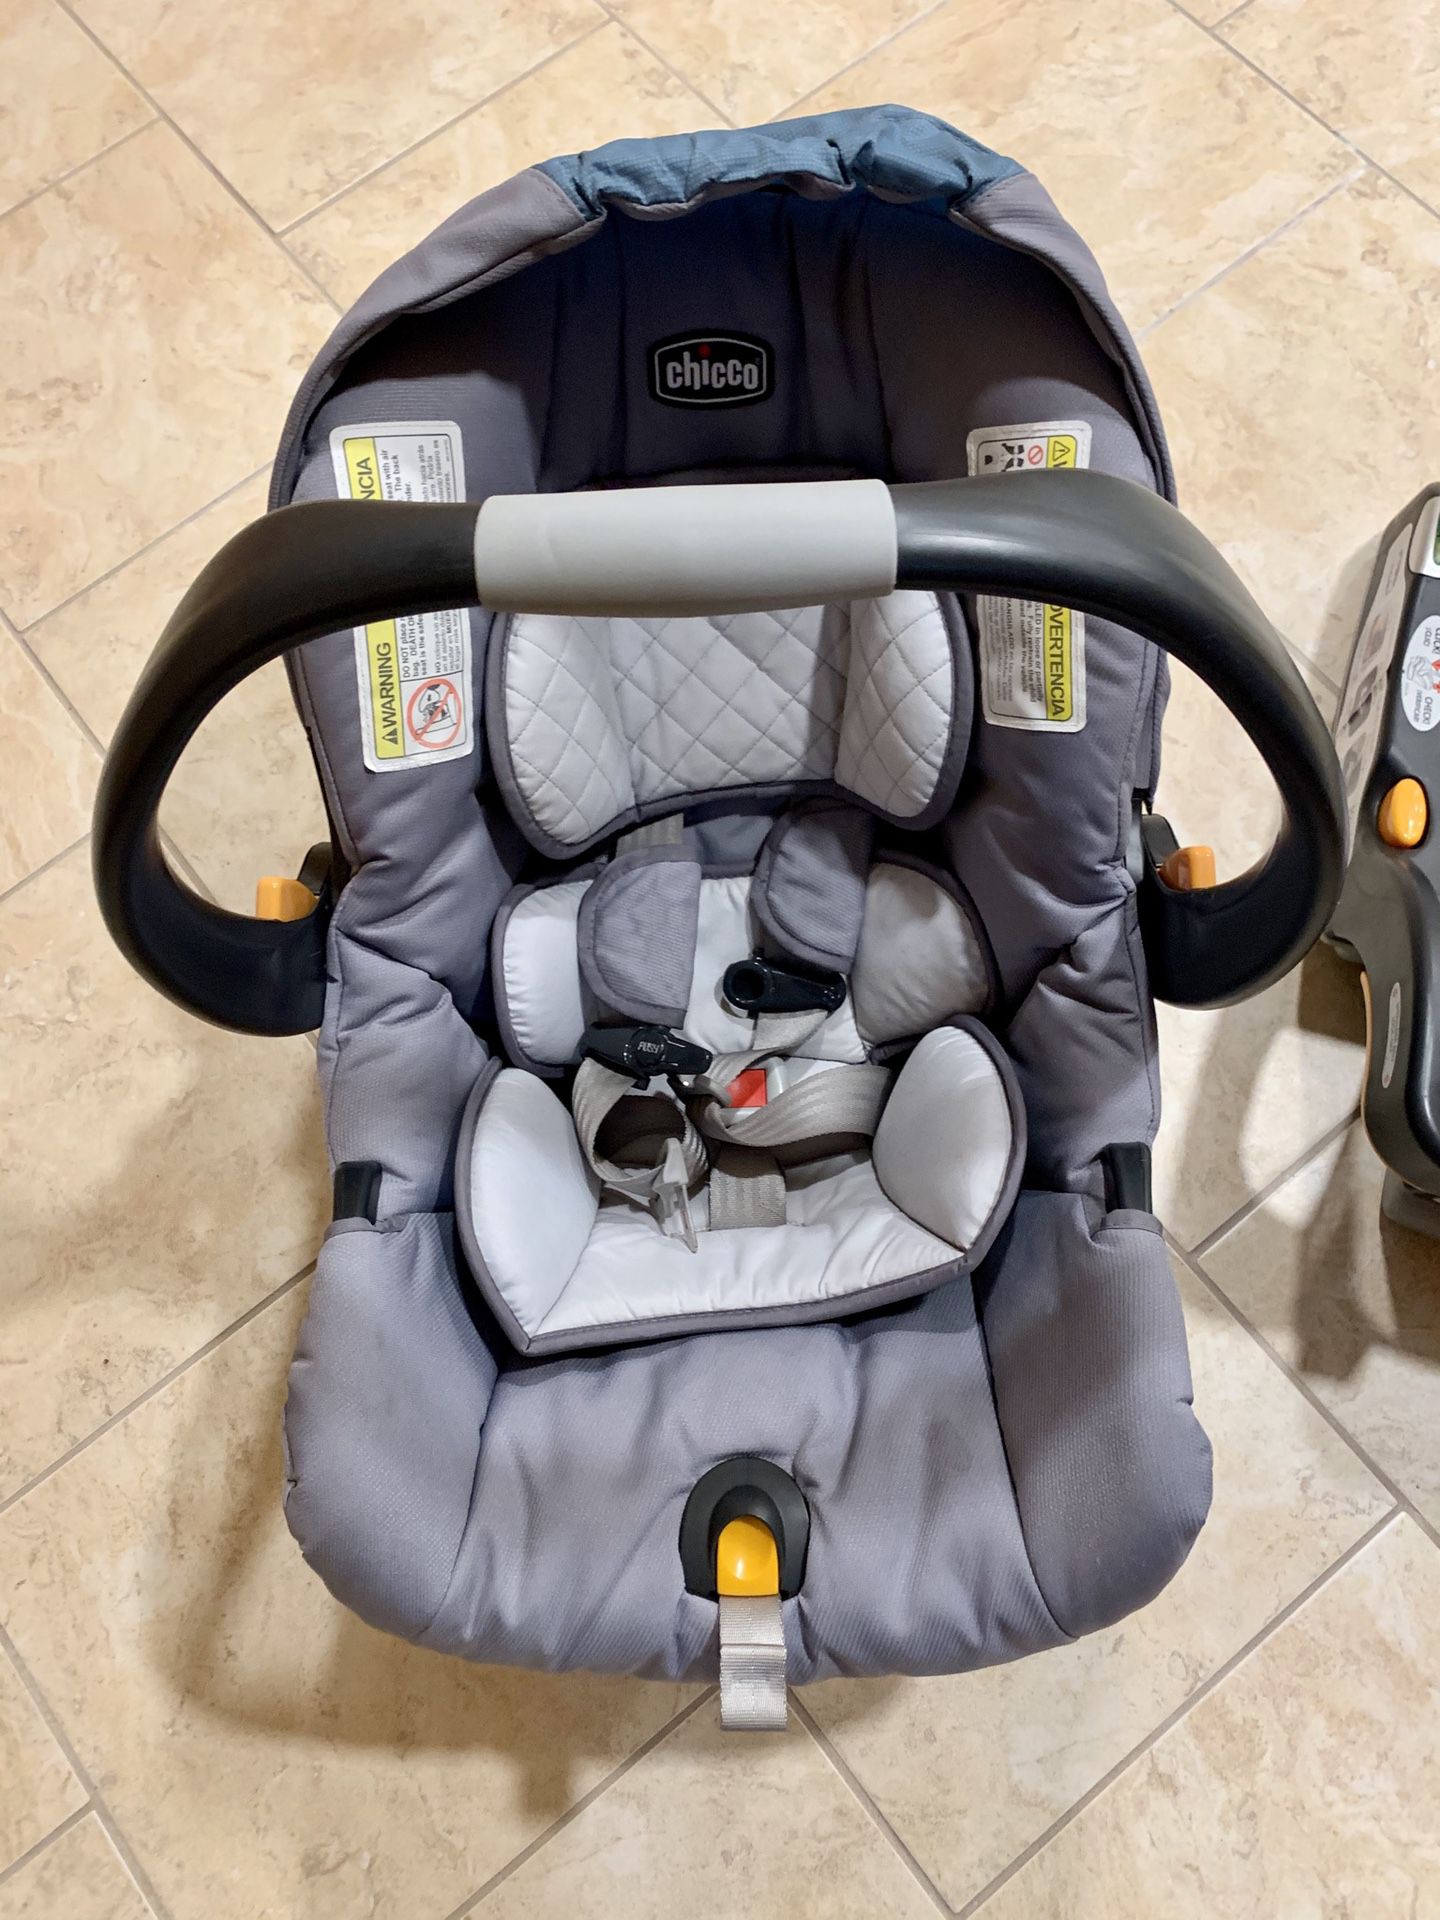 Chicco Keyfit 30 infant car seat and 3 bases